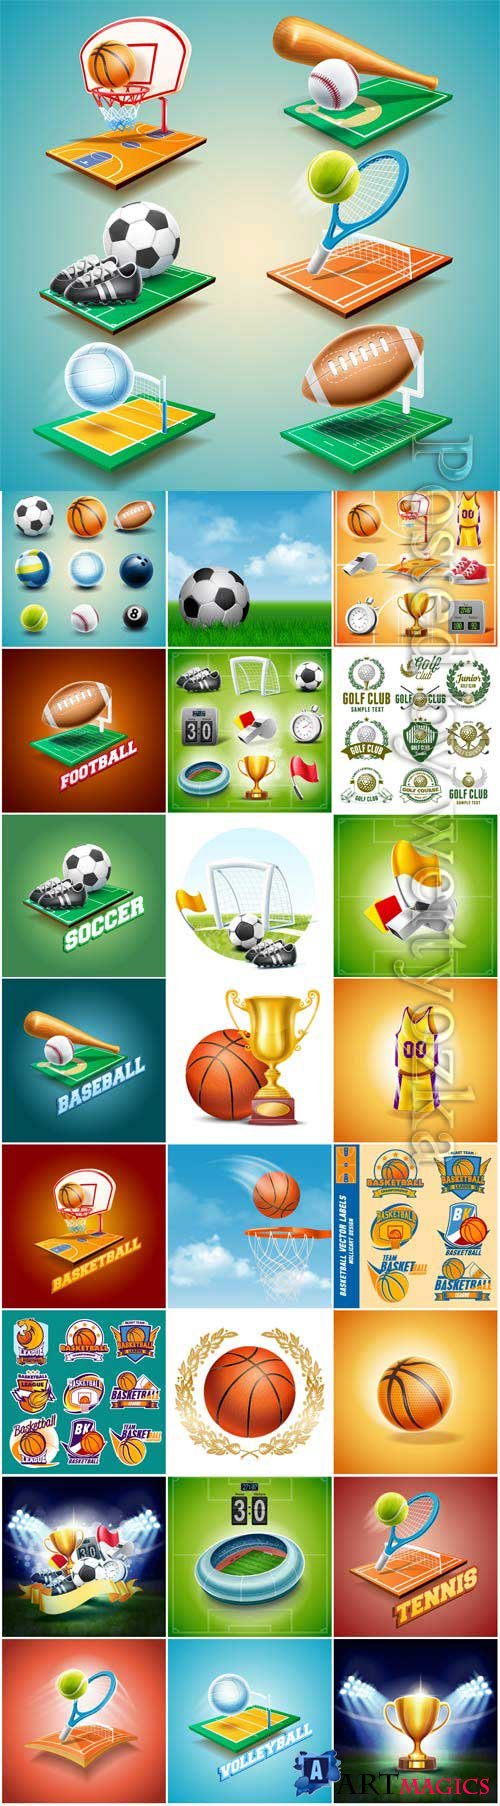 Sports items, balls and awards in vector